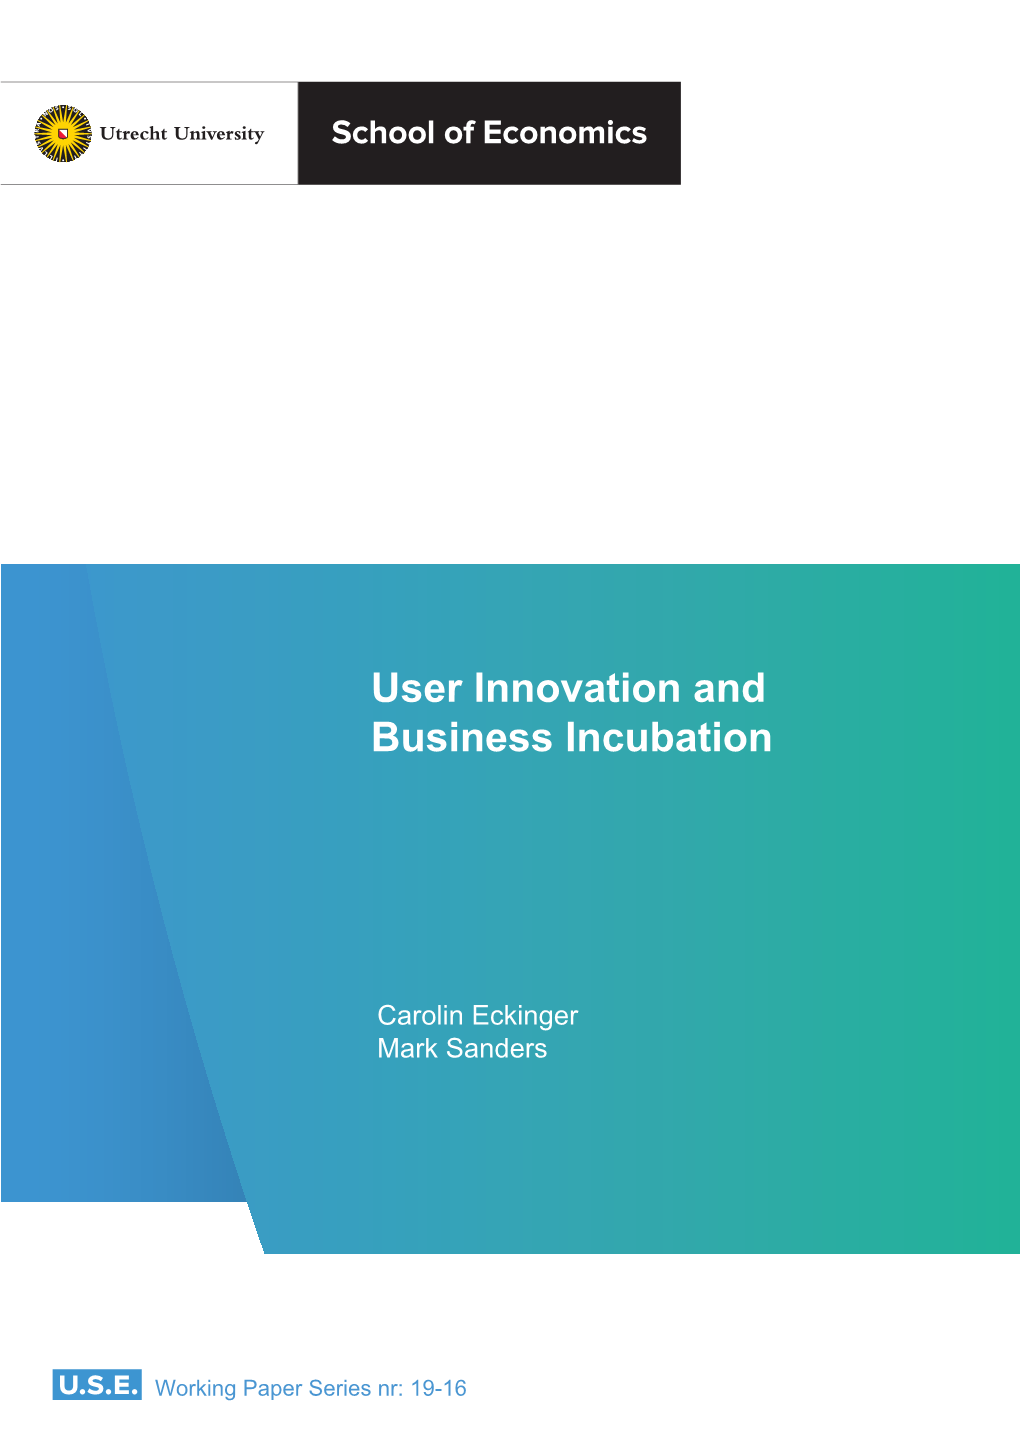 User Innovation and Business Incubation